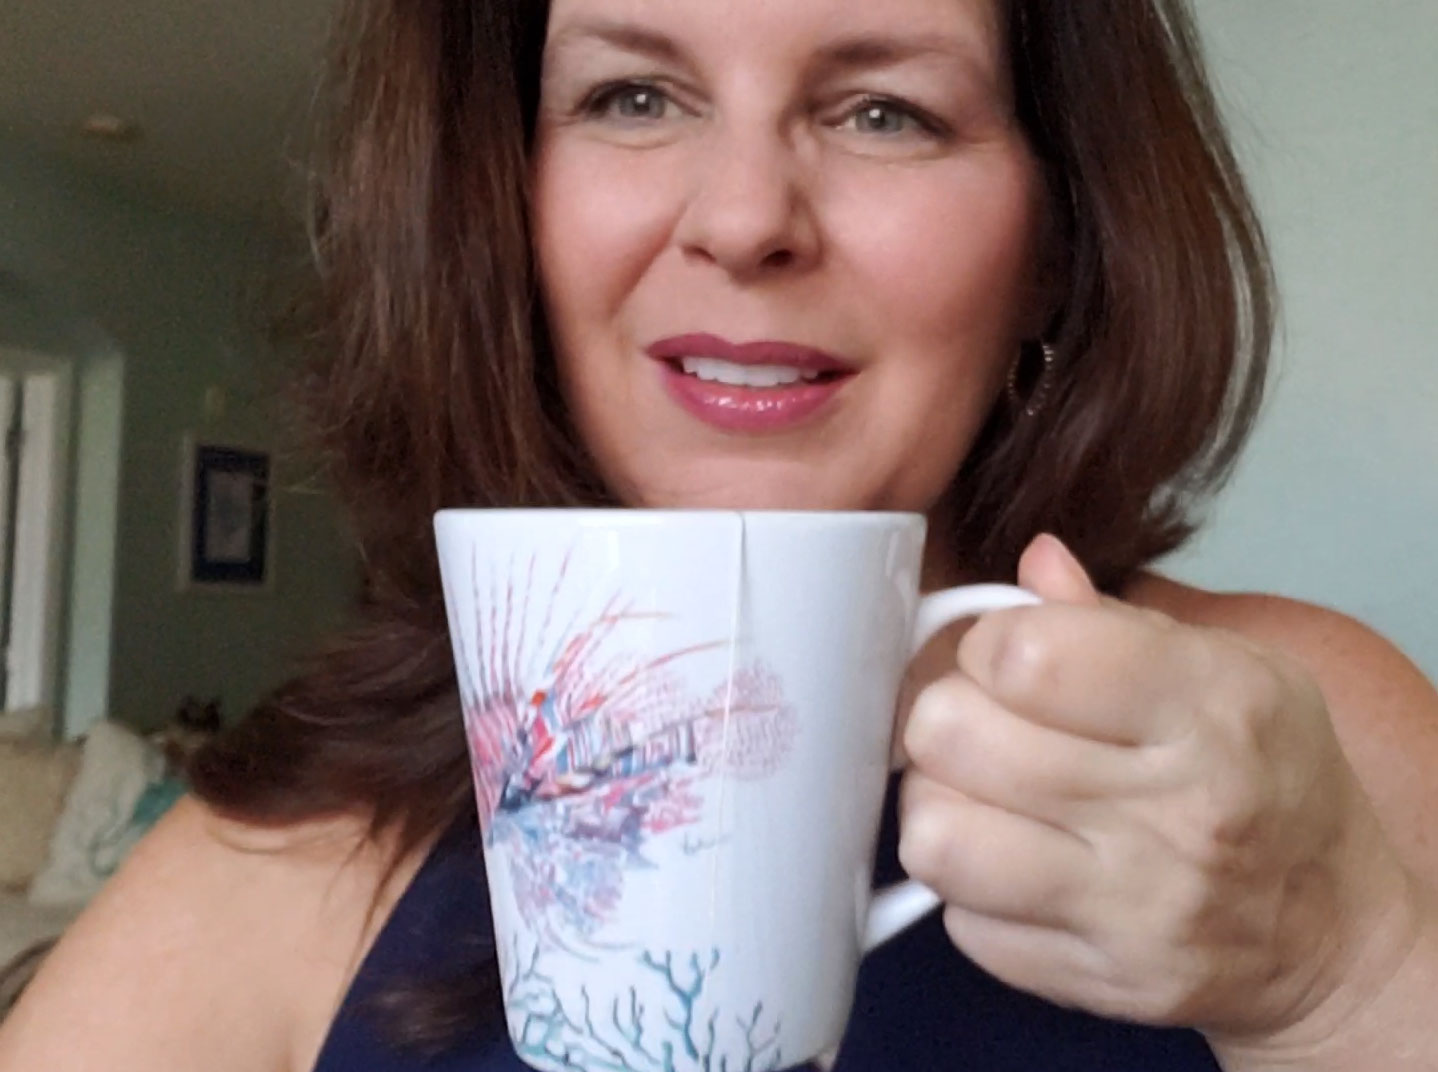 Victoria (Rigali) Grigaliunas of Do Tell A Belle holding her lion fish latte mug